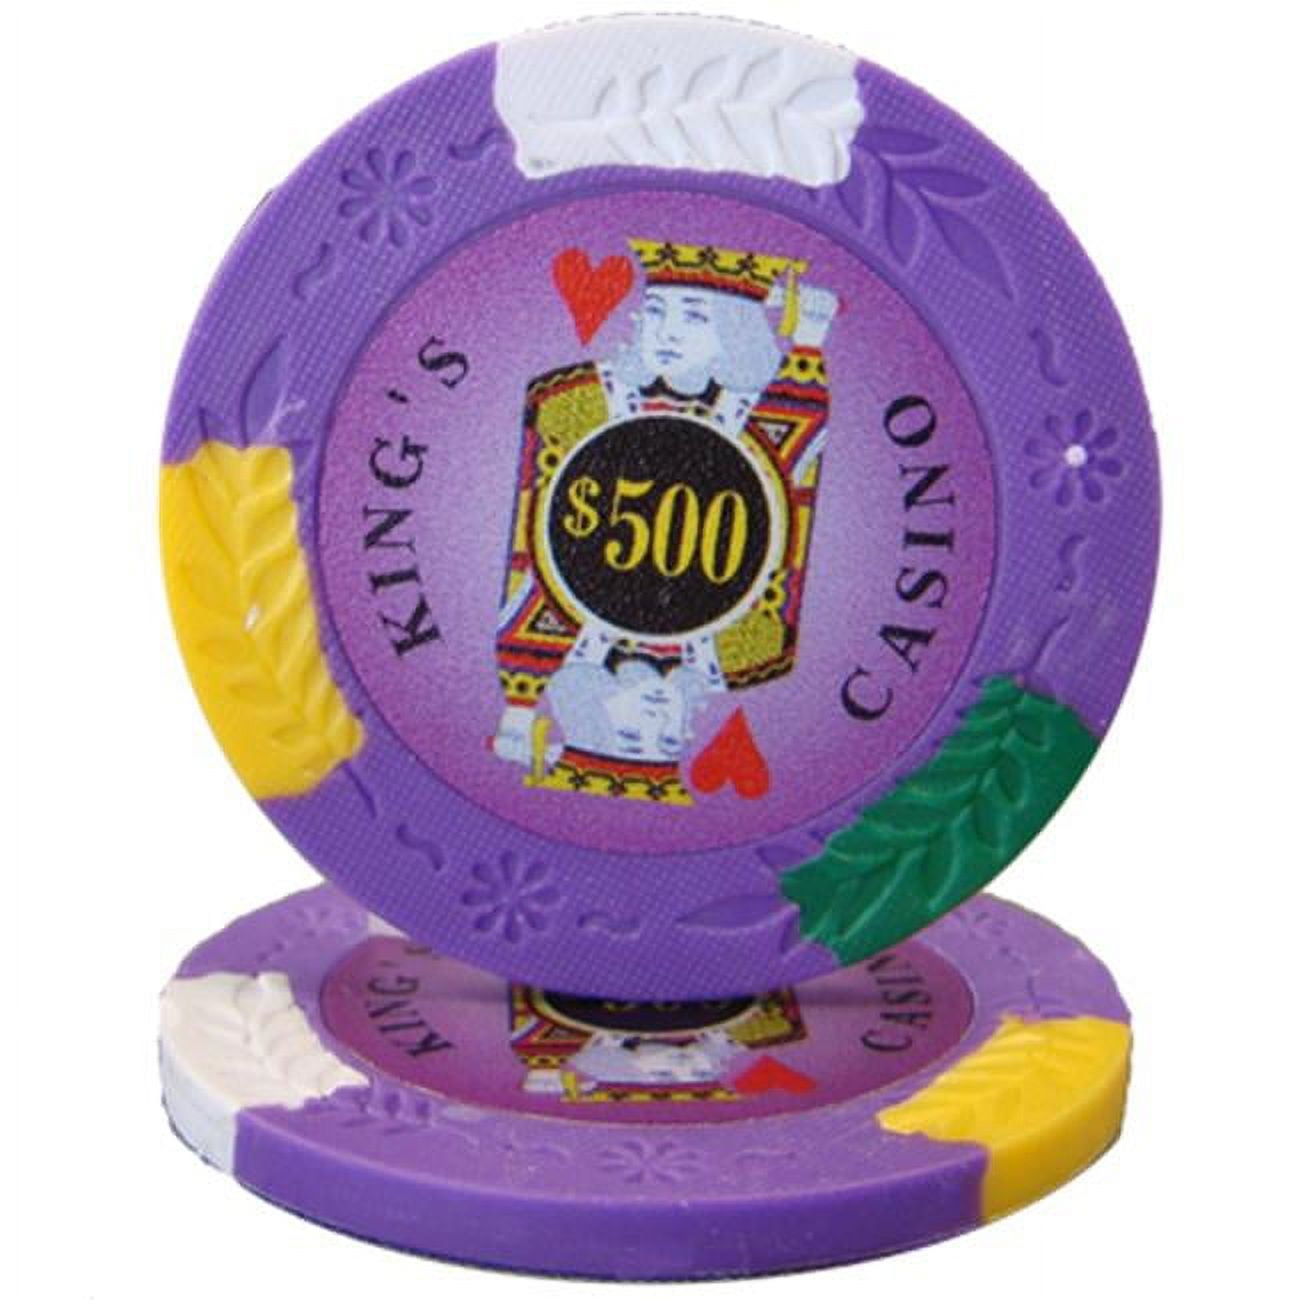 Cpkc-500-25 14 G Kings Casino Pro Clay - Dollar 500, Roll Of 25